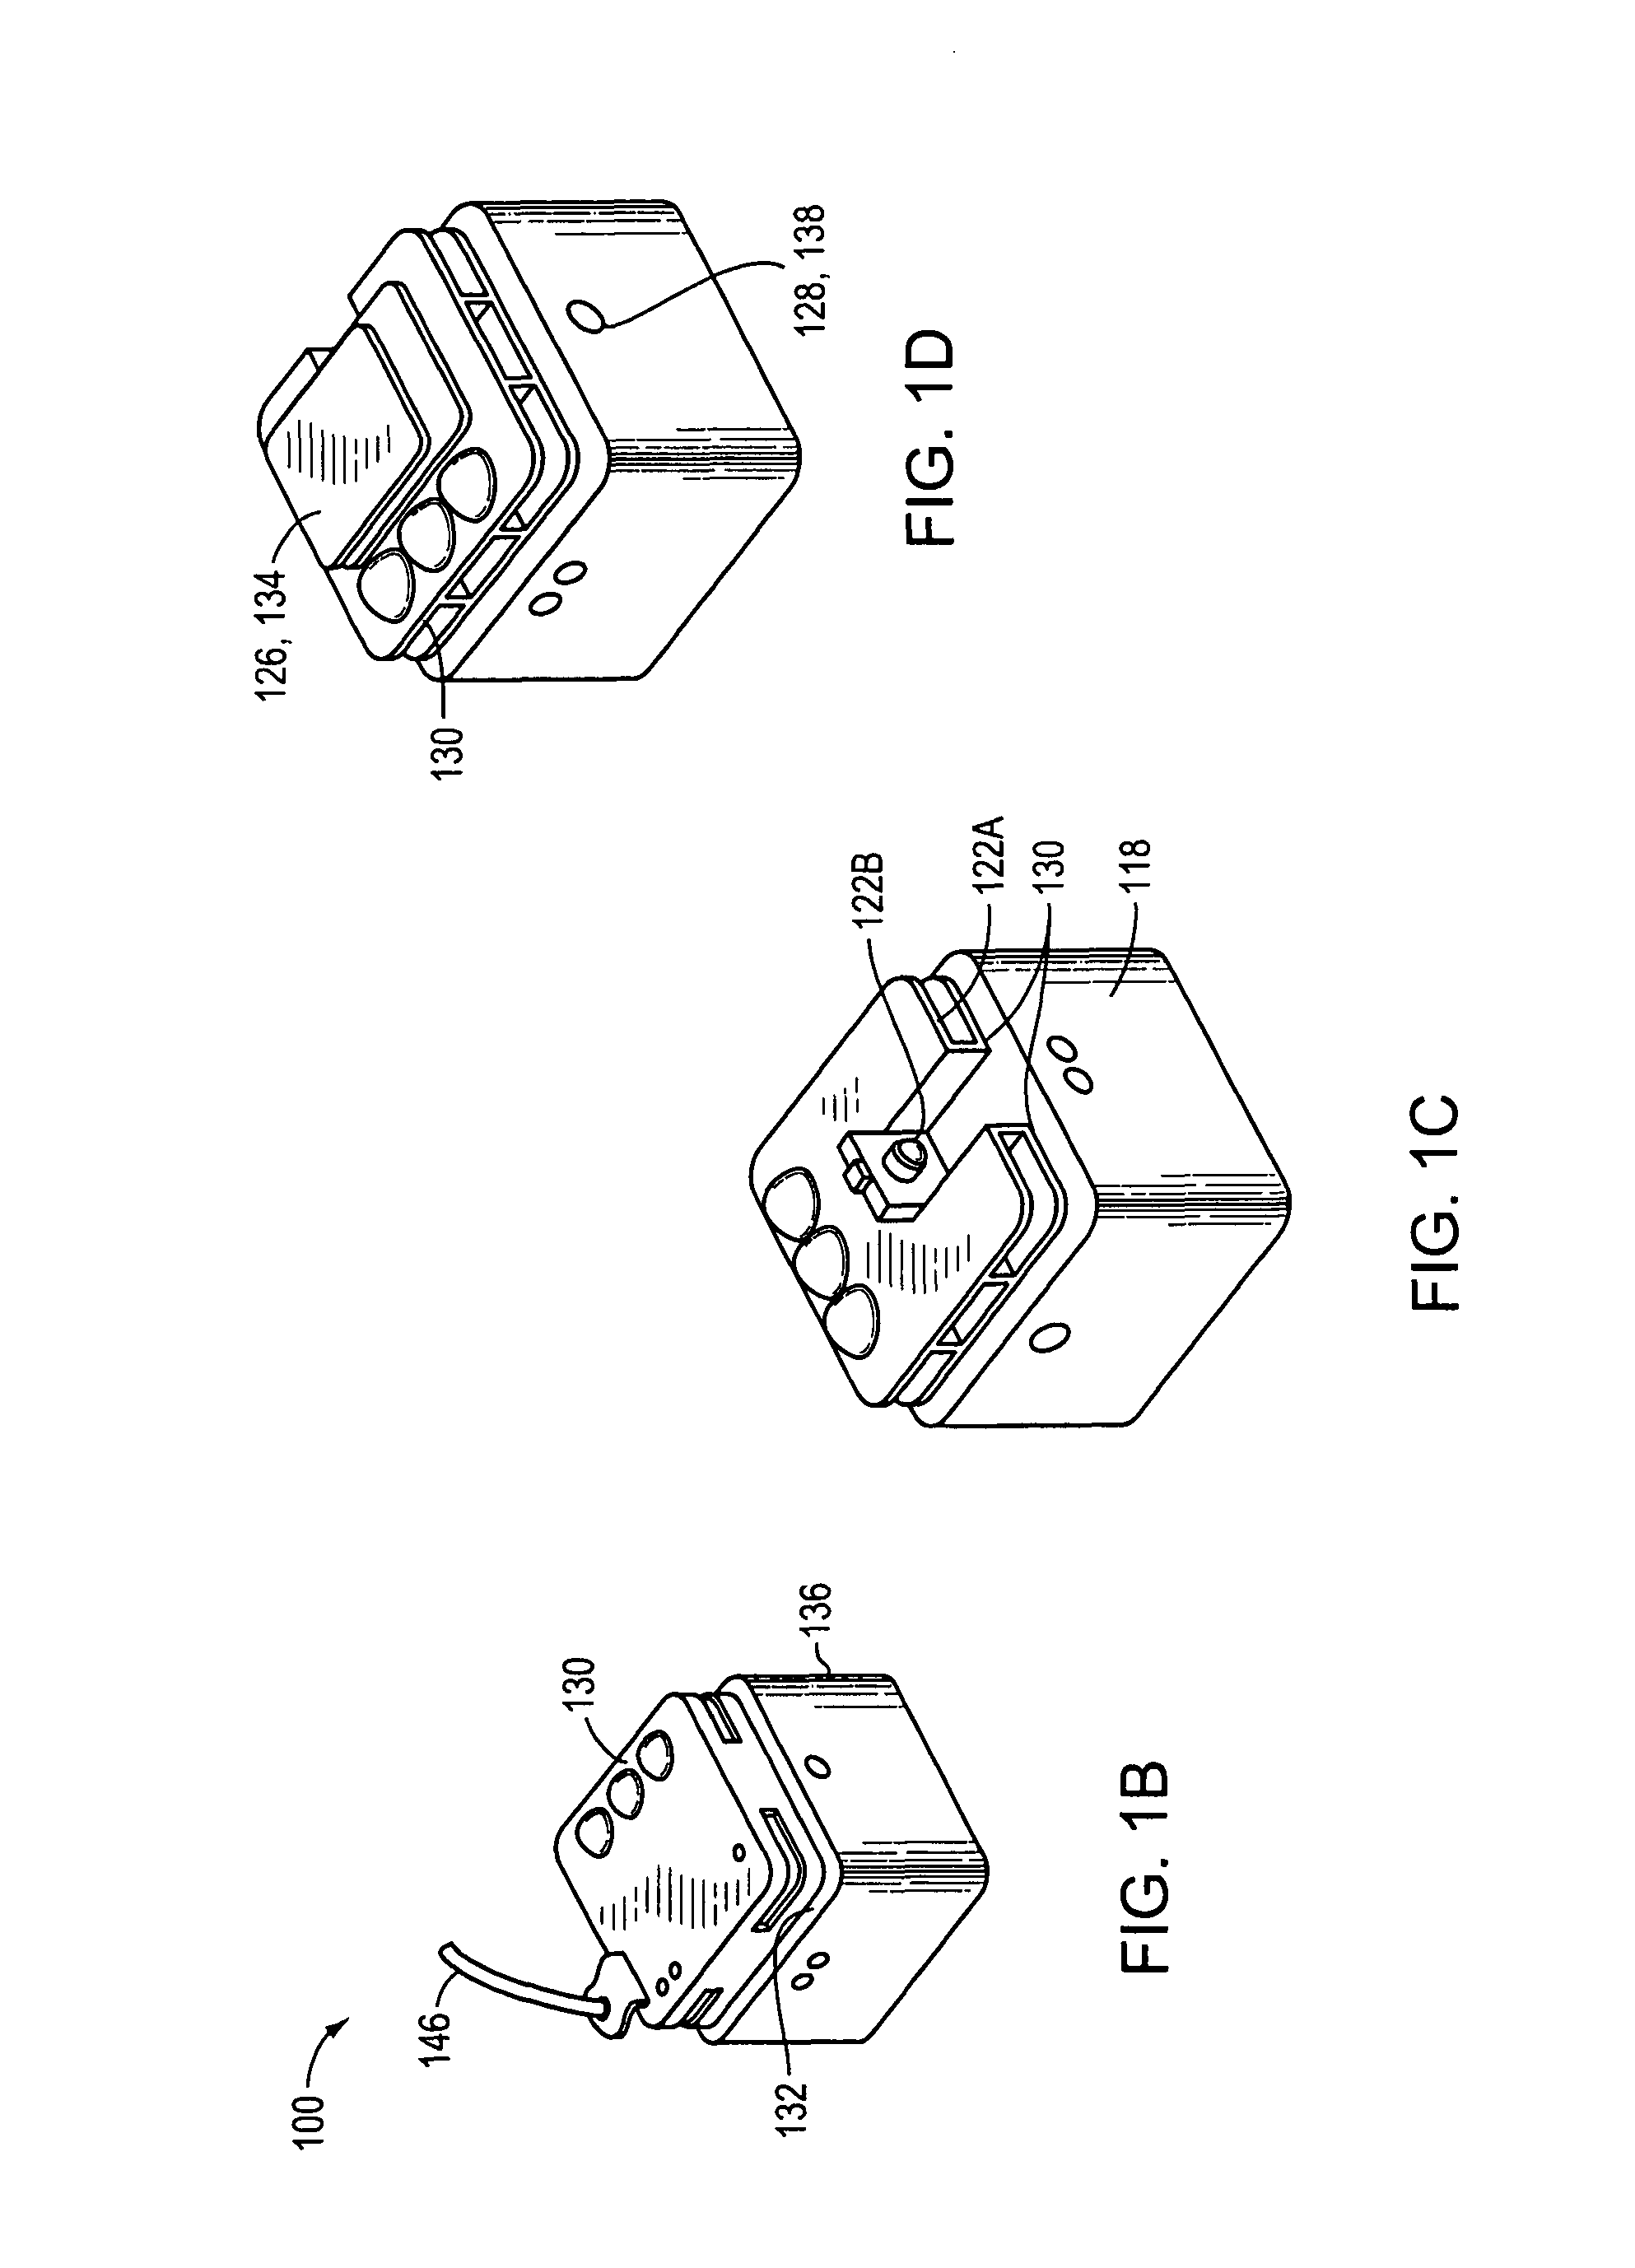 Systems and methods for dispersing and clustering a plurality of robotic devices